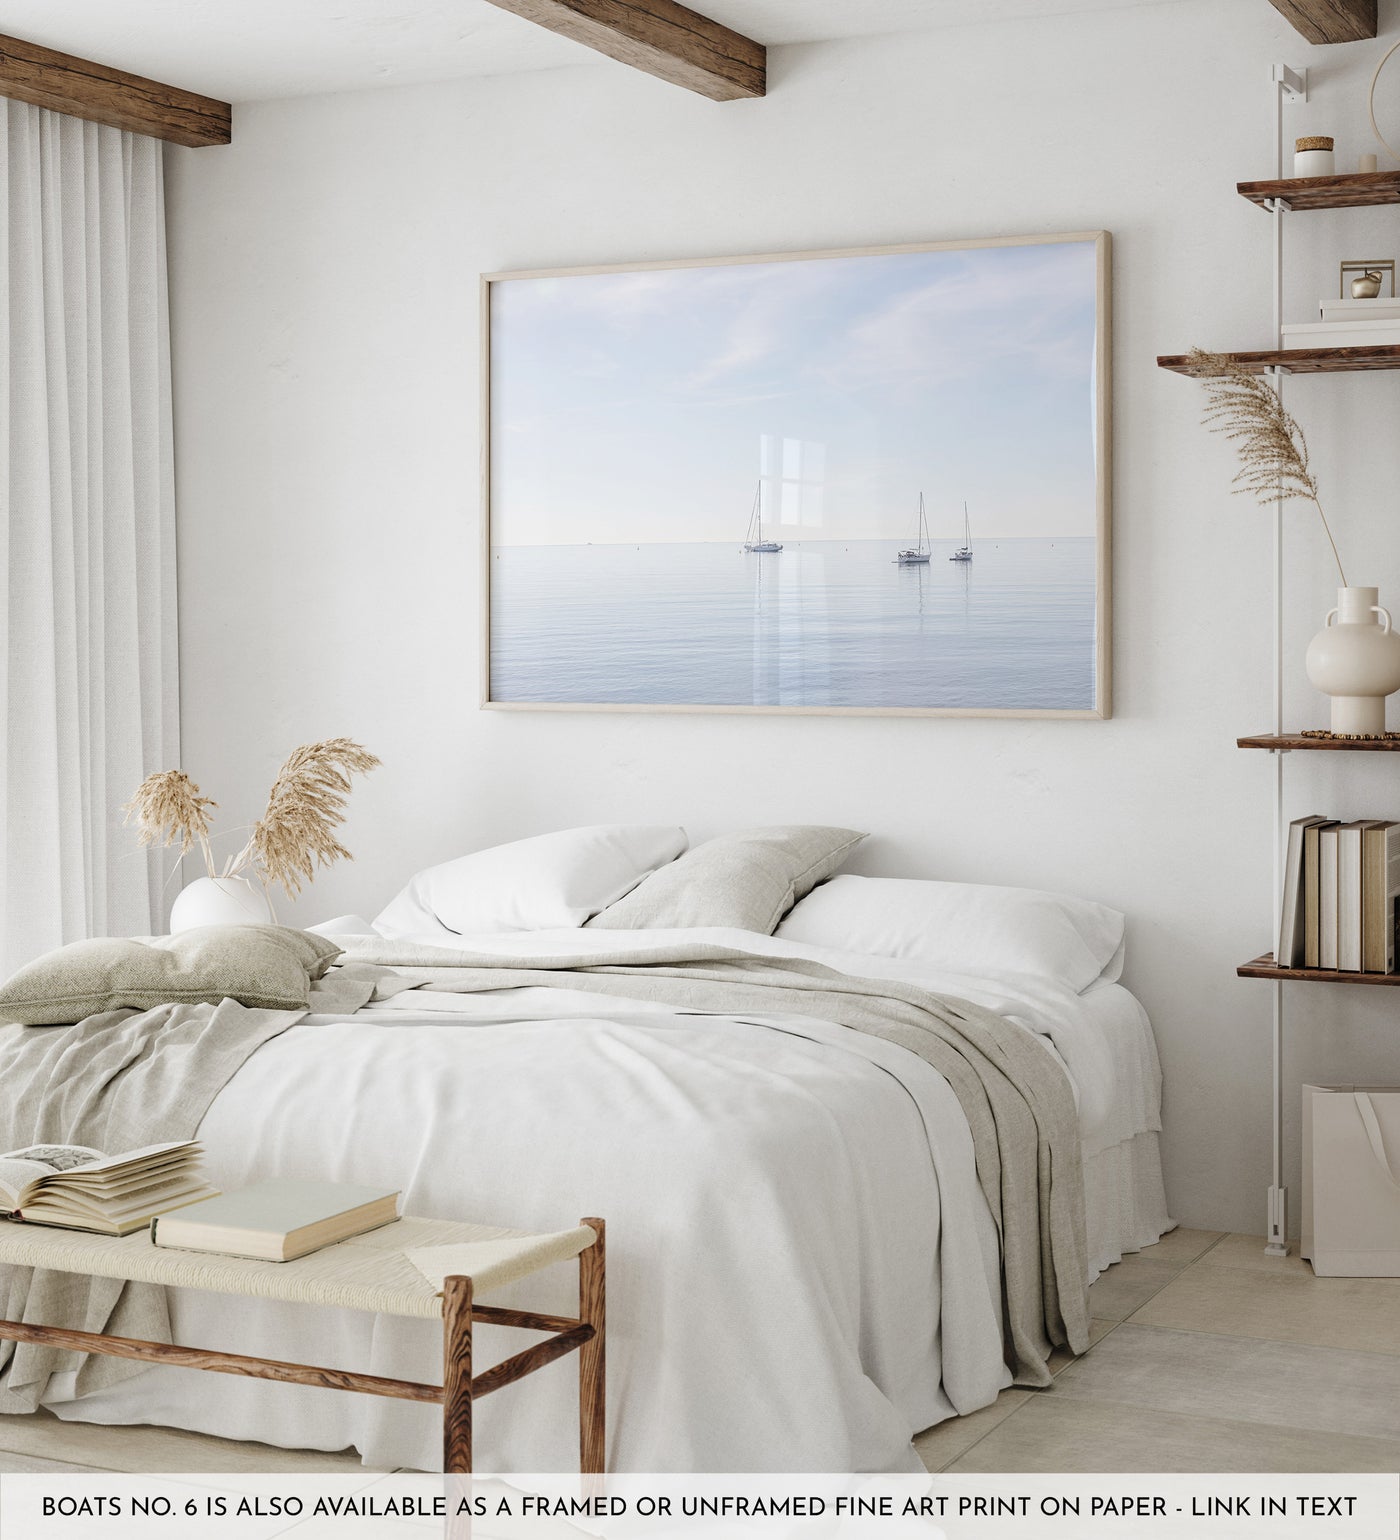 Boats No 6 - Fine art print by Cattie Coyle Photography in bedroom